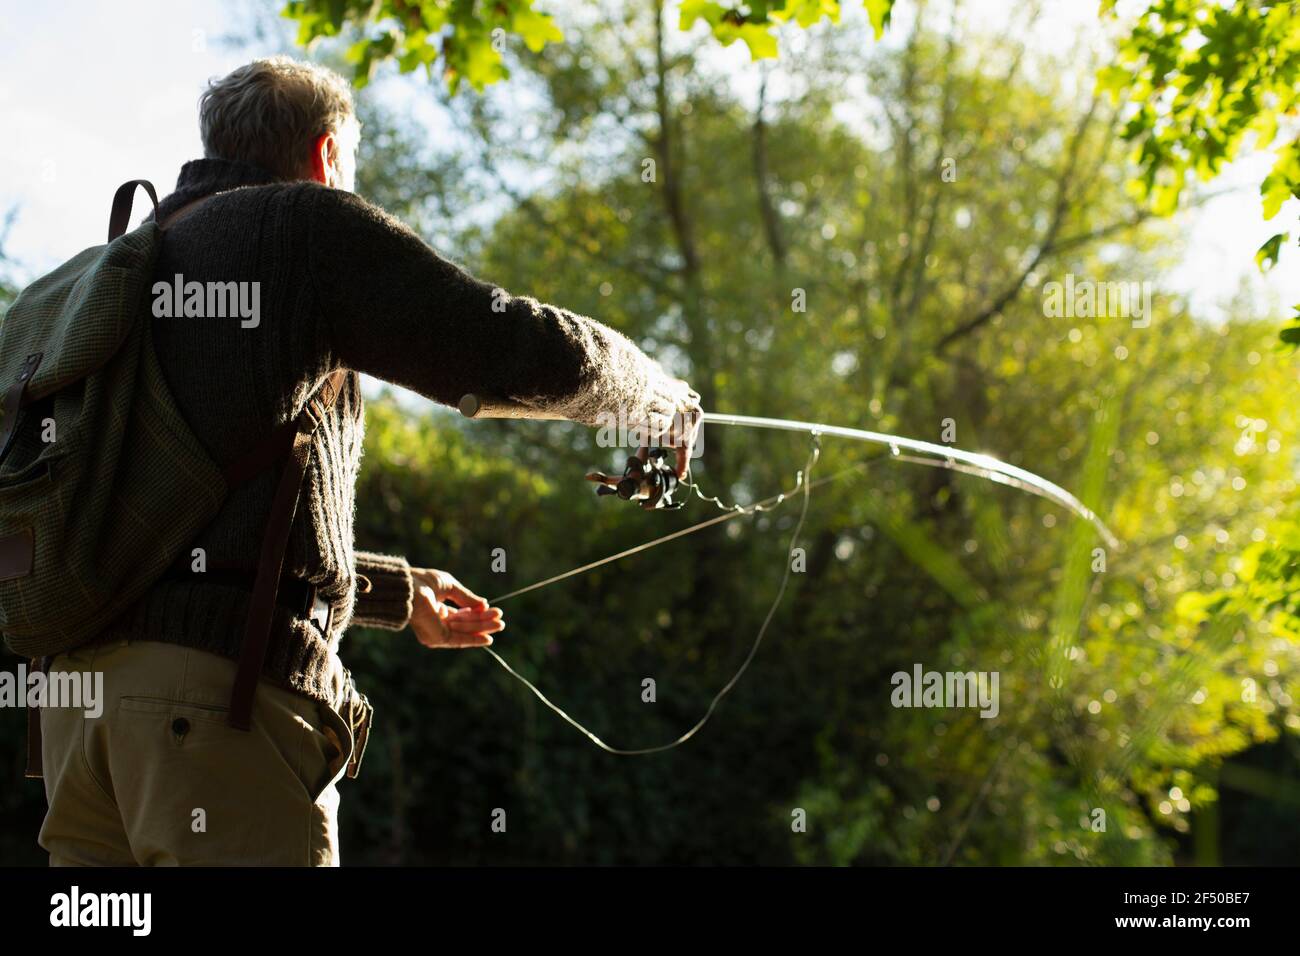 Man with backpack casting fly fishing pole below sunny trees Stock Photo -  Alamy